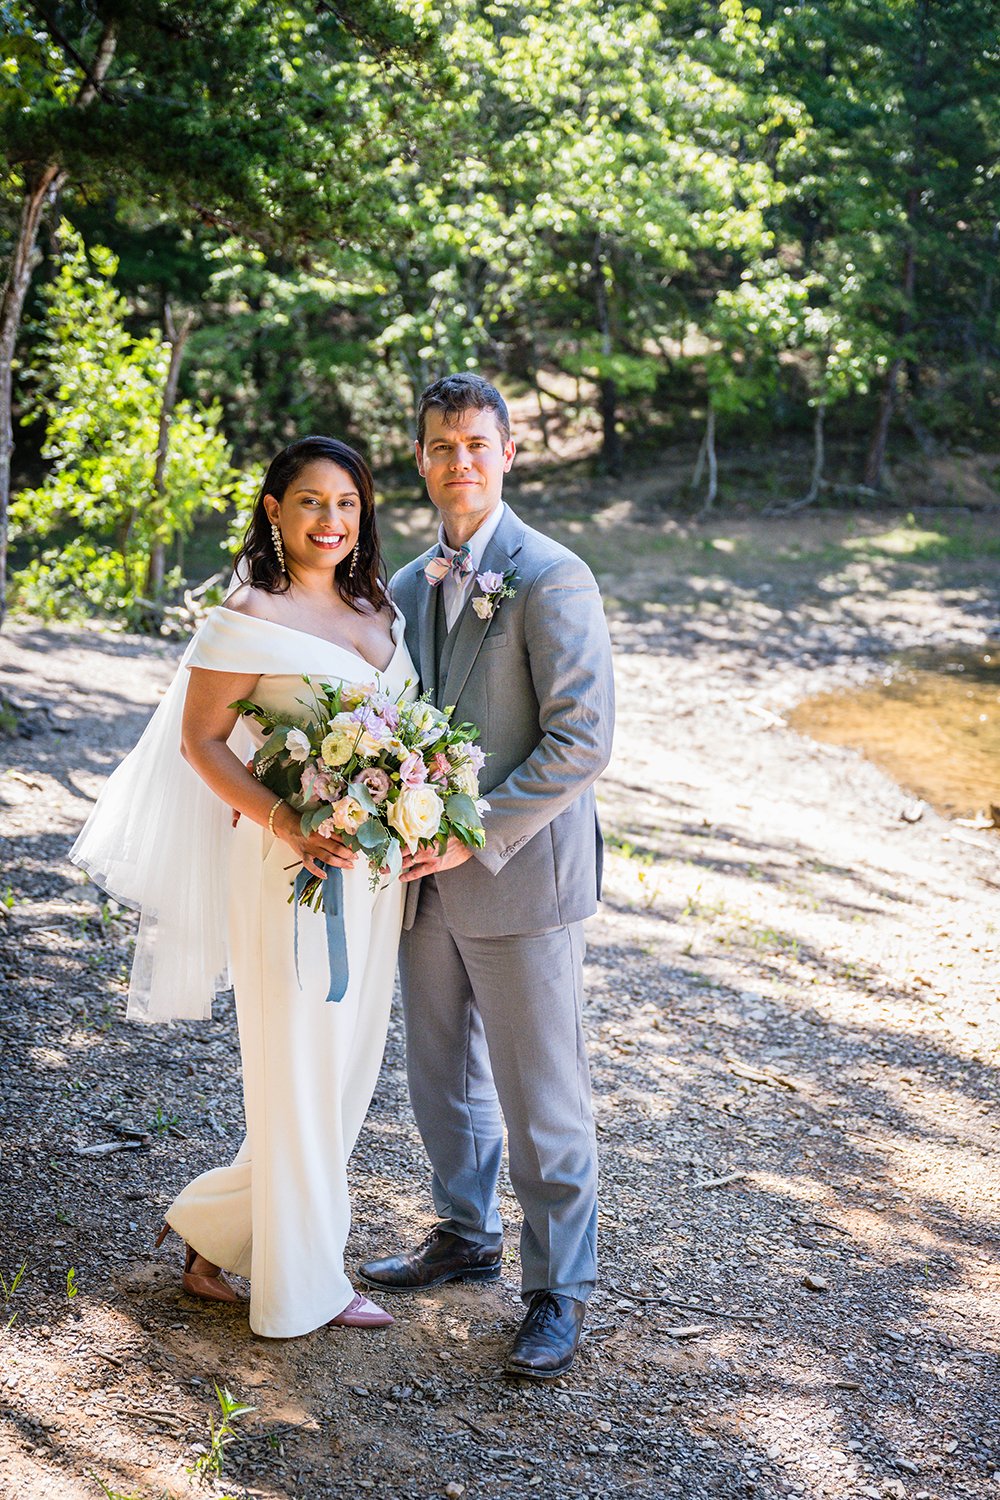 A newlywed couple stands underneath a canopy of trees and next to the shoreline for a photo together during their elopement.